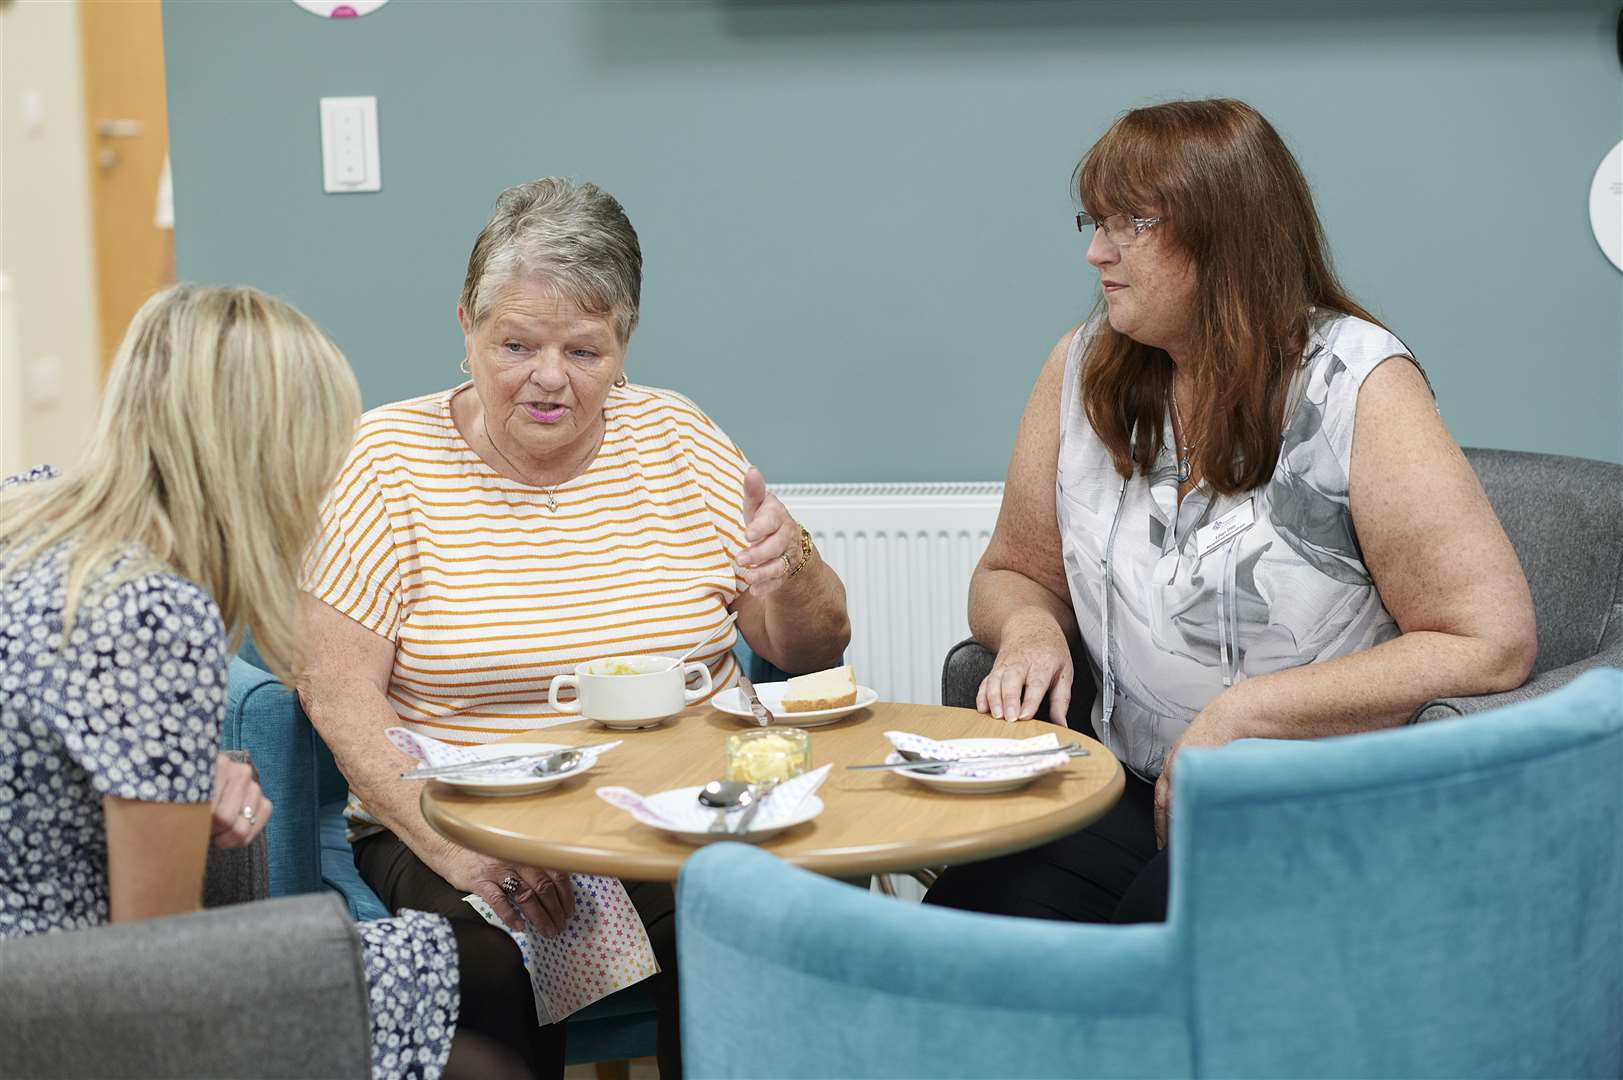 With the right care, information and support, many people can live well with dementia for years.